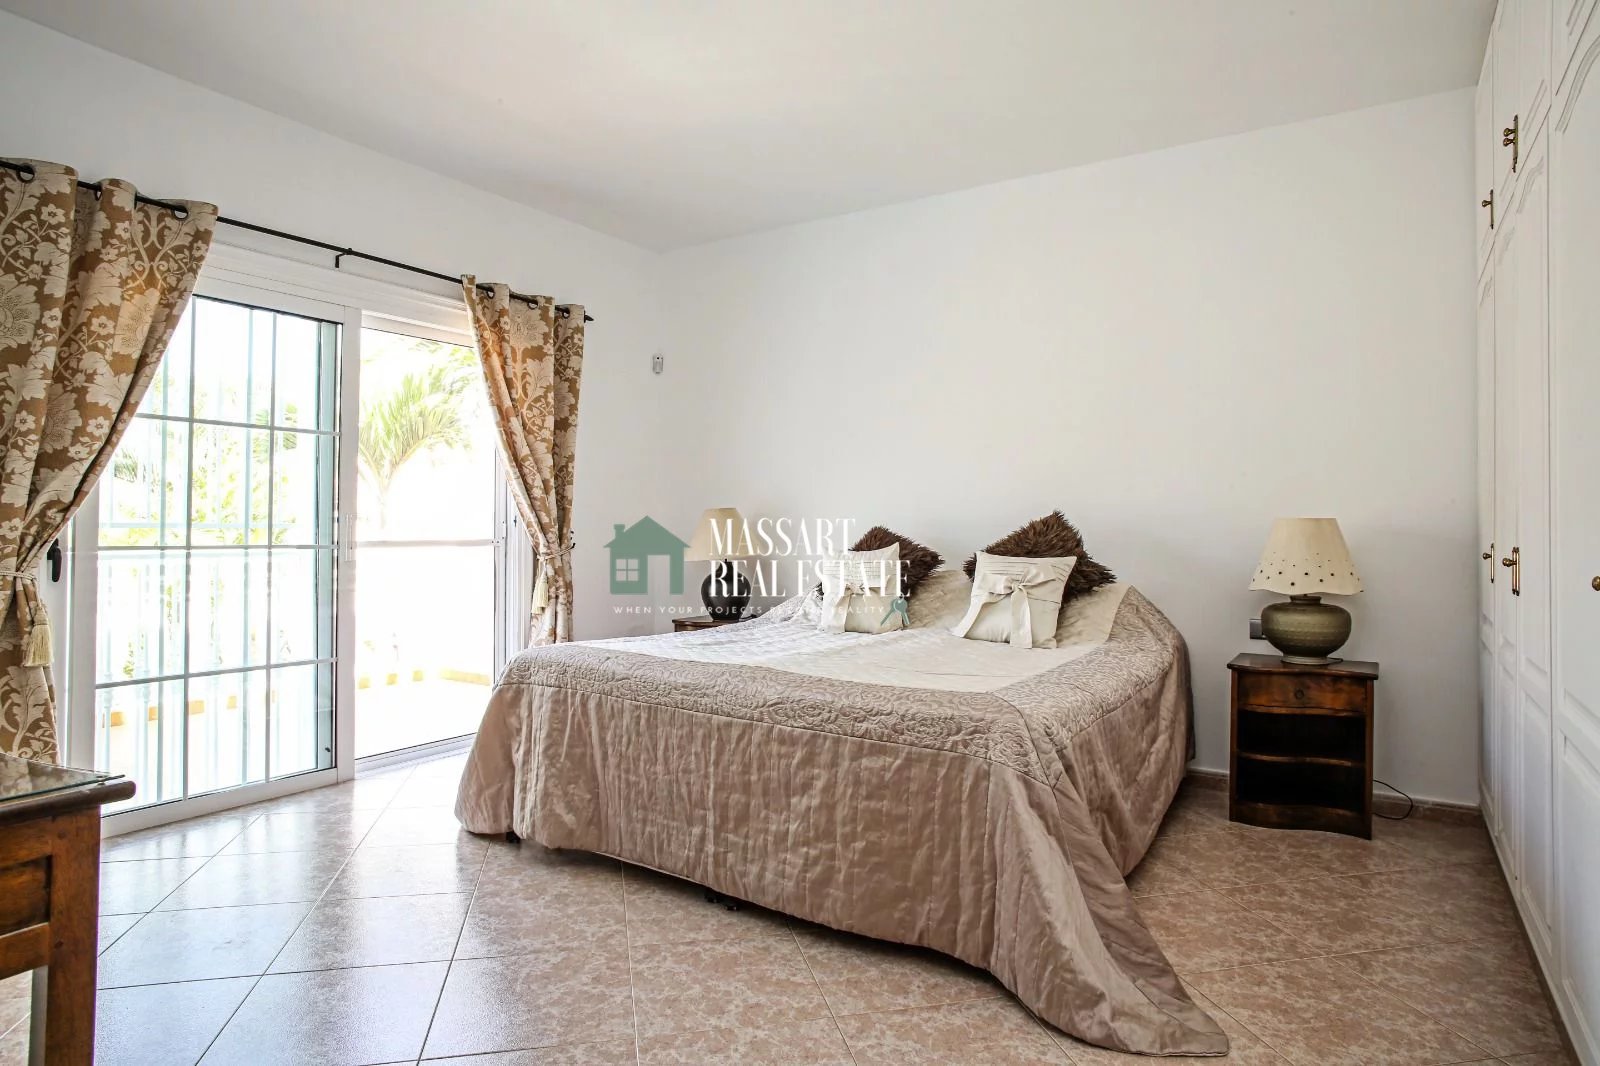 Stately villa located on a 1005 m2 plot in an area of absolute tranquility, in La Estrella.